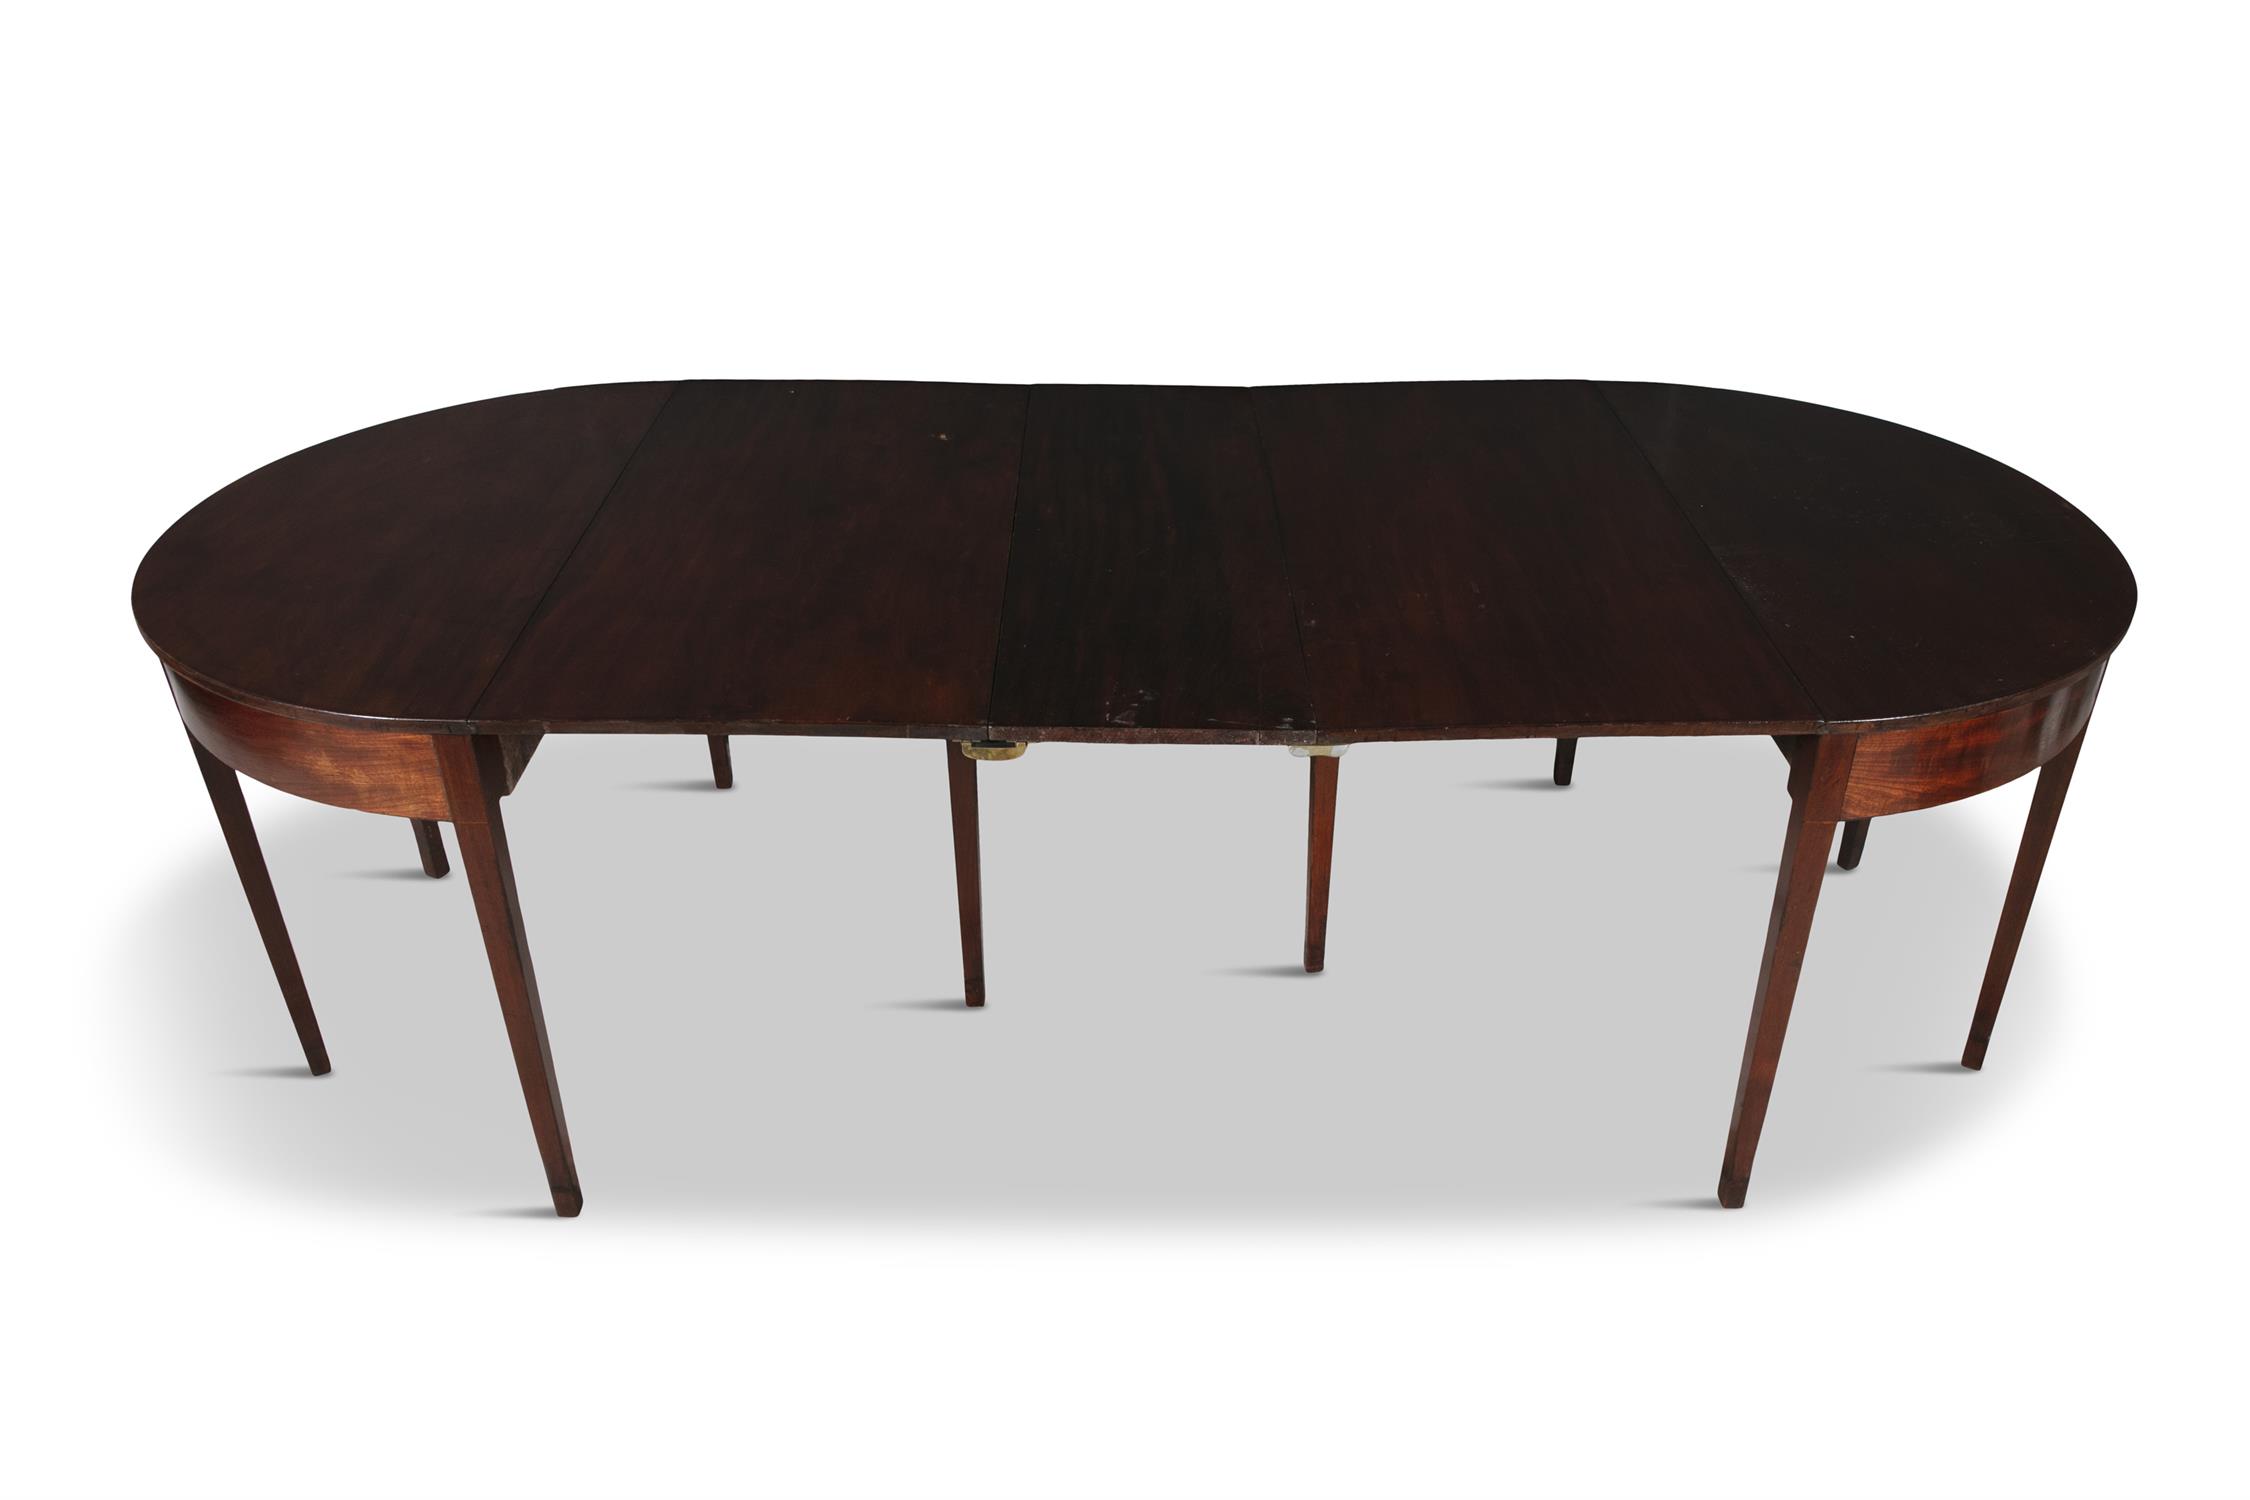 A FEDERAL MAHOGANY DINING TABLE, PHILADELPHIA, EARLY 19TH CENTURY the hinged drop leaf D-ends - Image 3 of 5